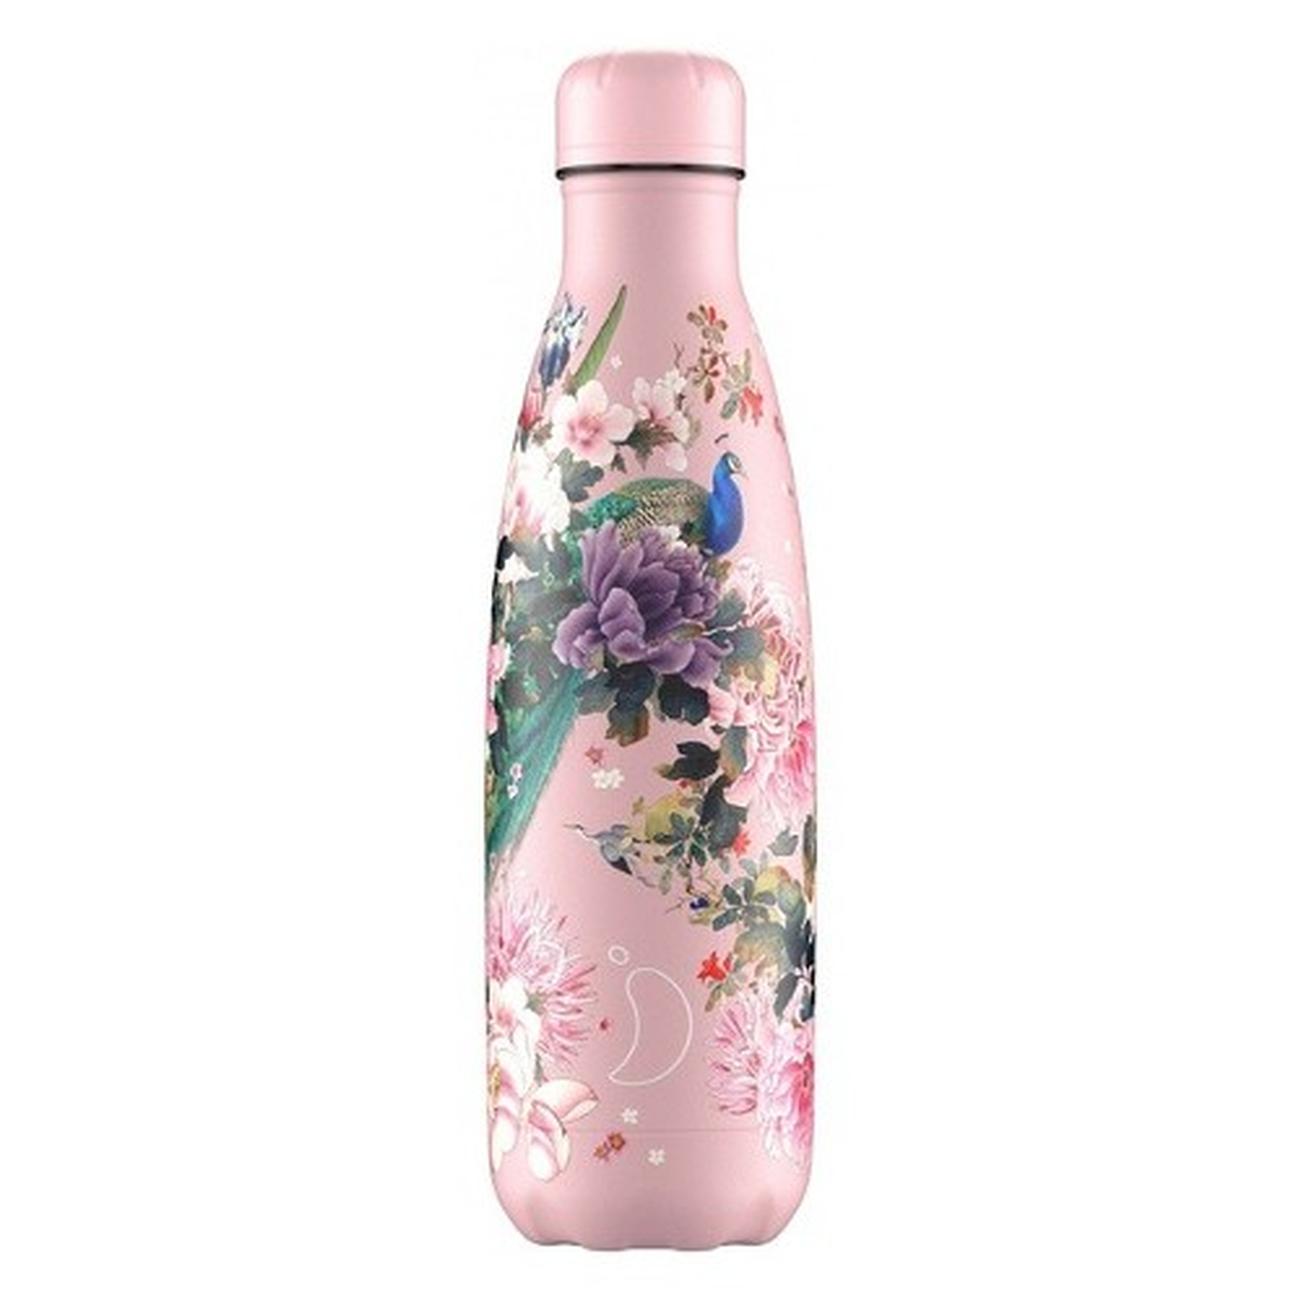 chillys-500ml-water-bottle-tropical-peacock-peonies - Chilly's 500ml Water Bottle Tropical Peacock Peonies